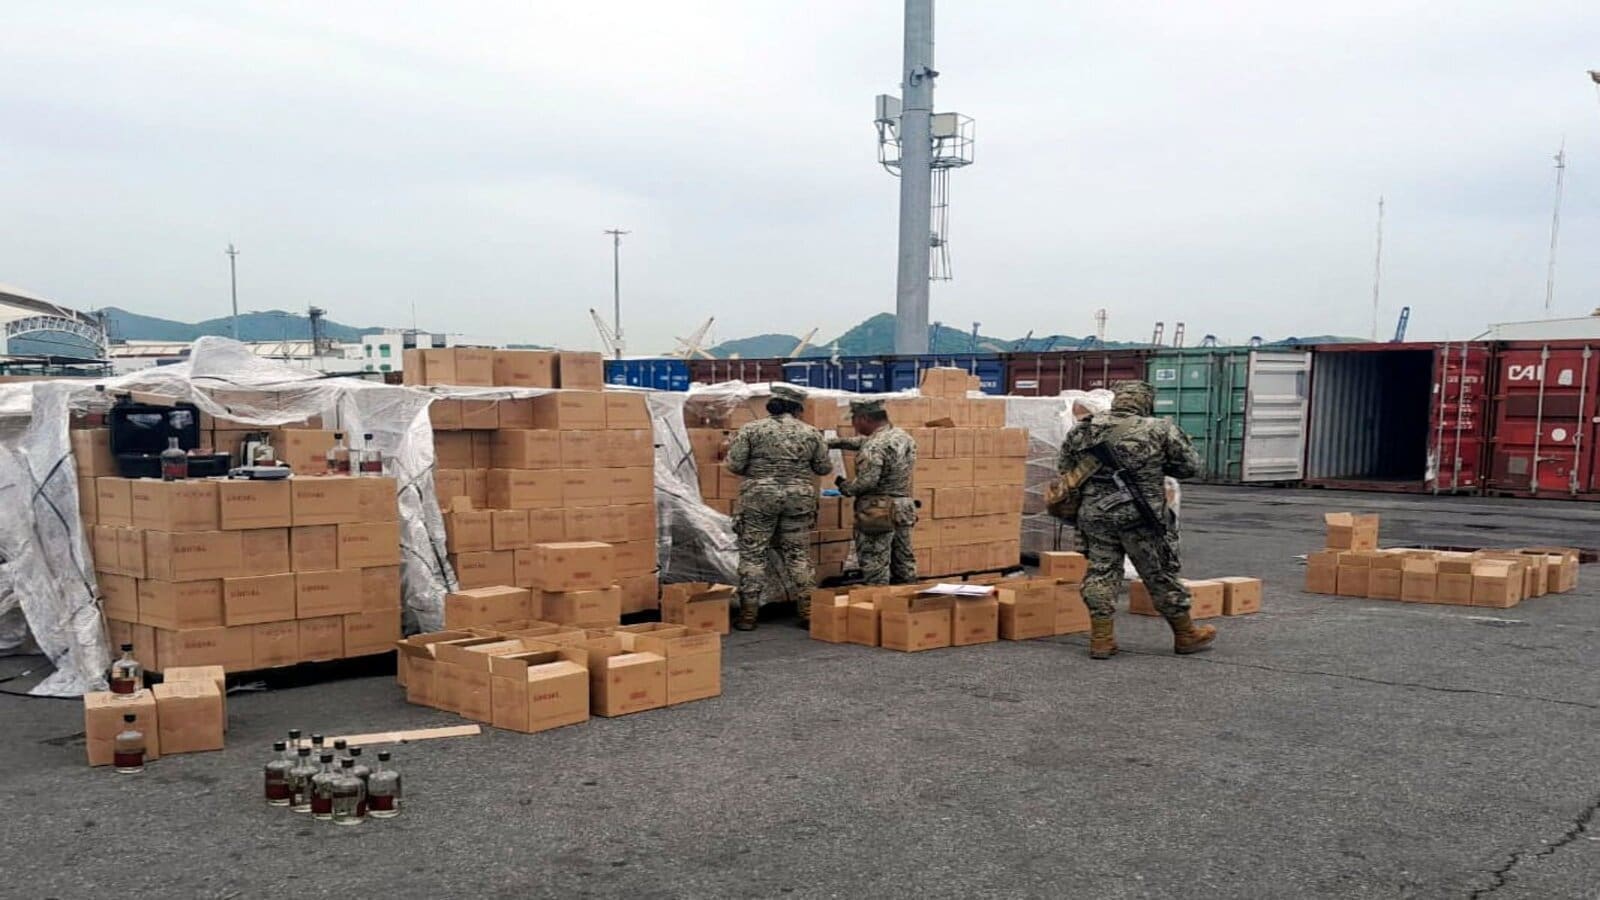 Mezcal bottles stuffed with 9.5 tons of liquid meth impounded at Mexican seaport